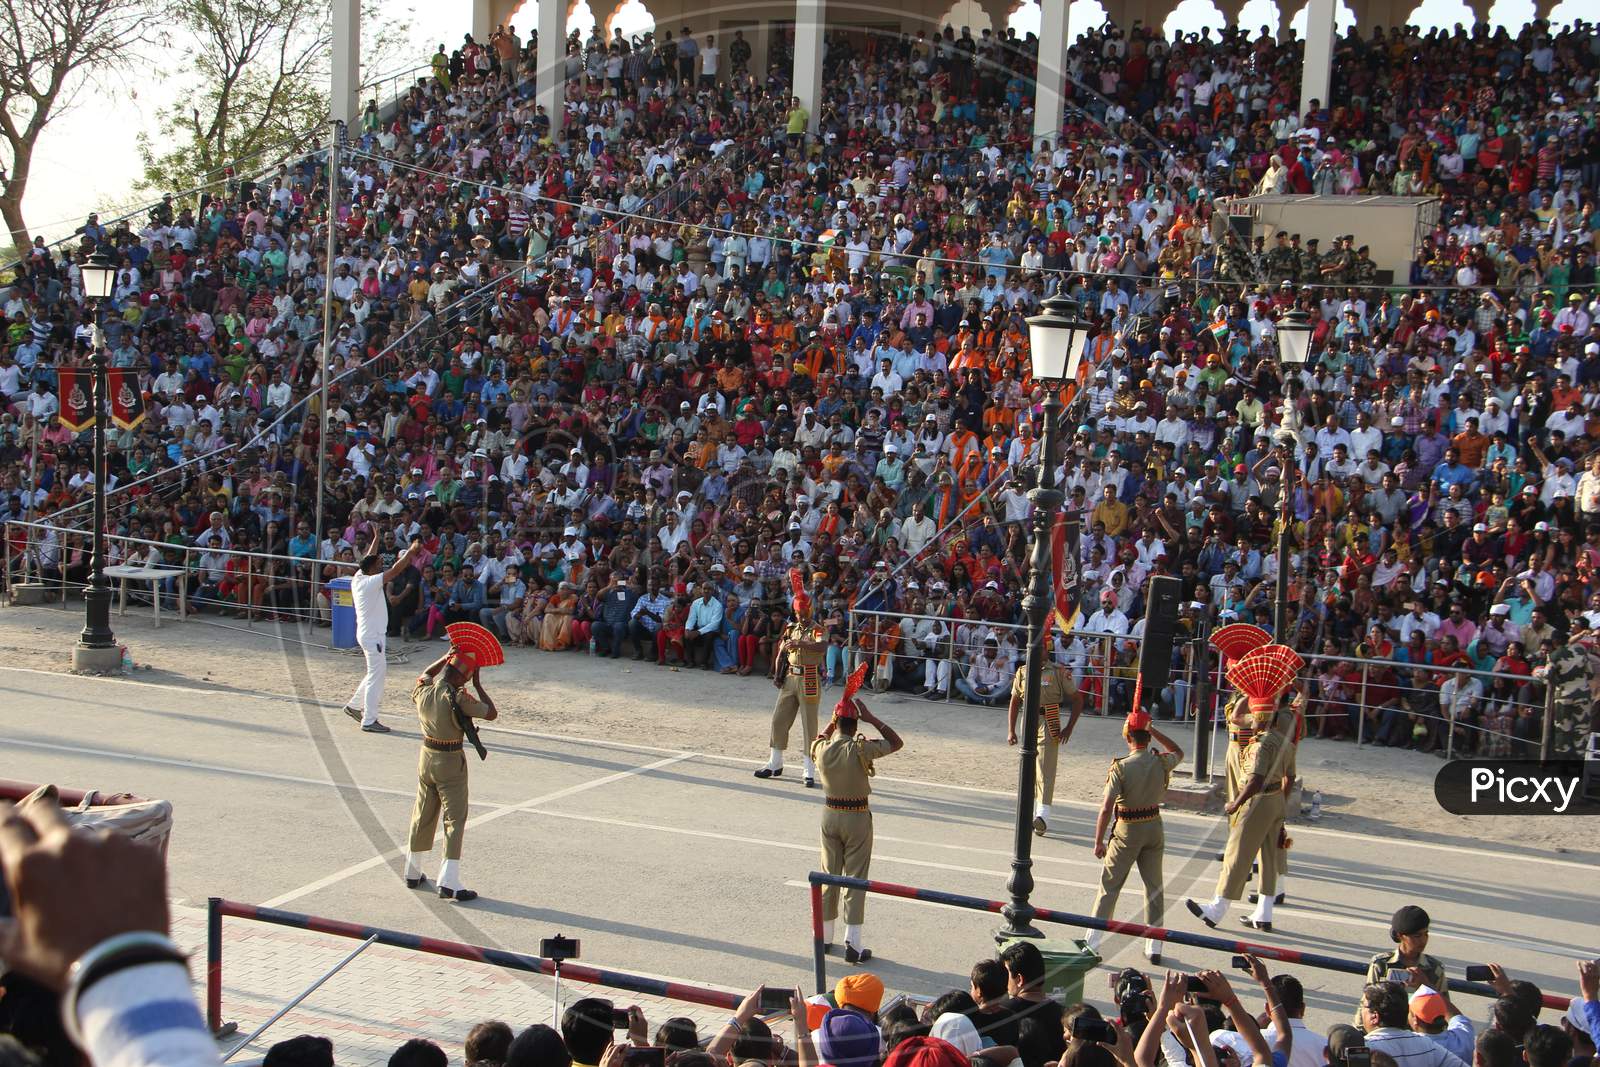 Indian crowd cheering and celebrating Border Security Force of Indian Army at Wagha Border, India. Amritsar, Punjab, India